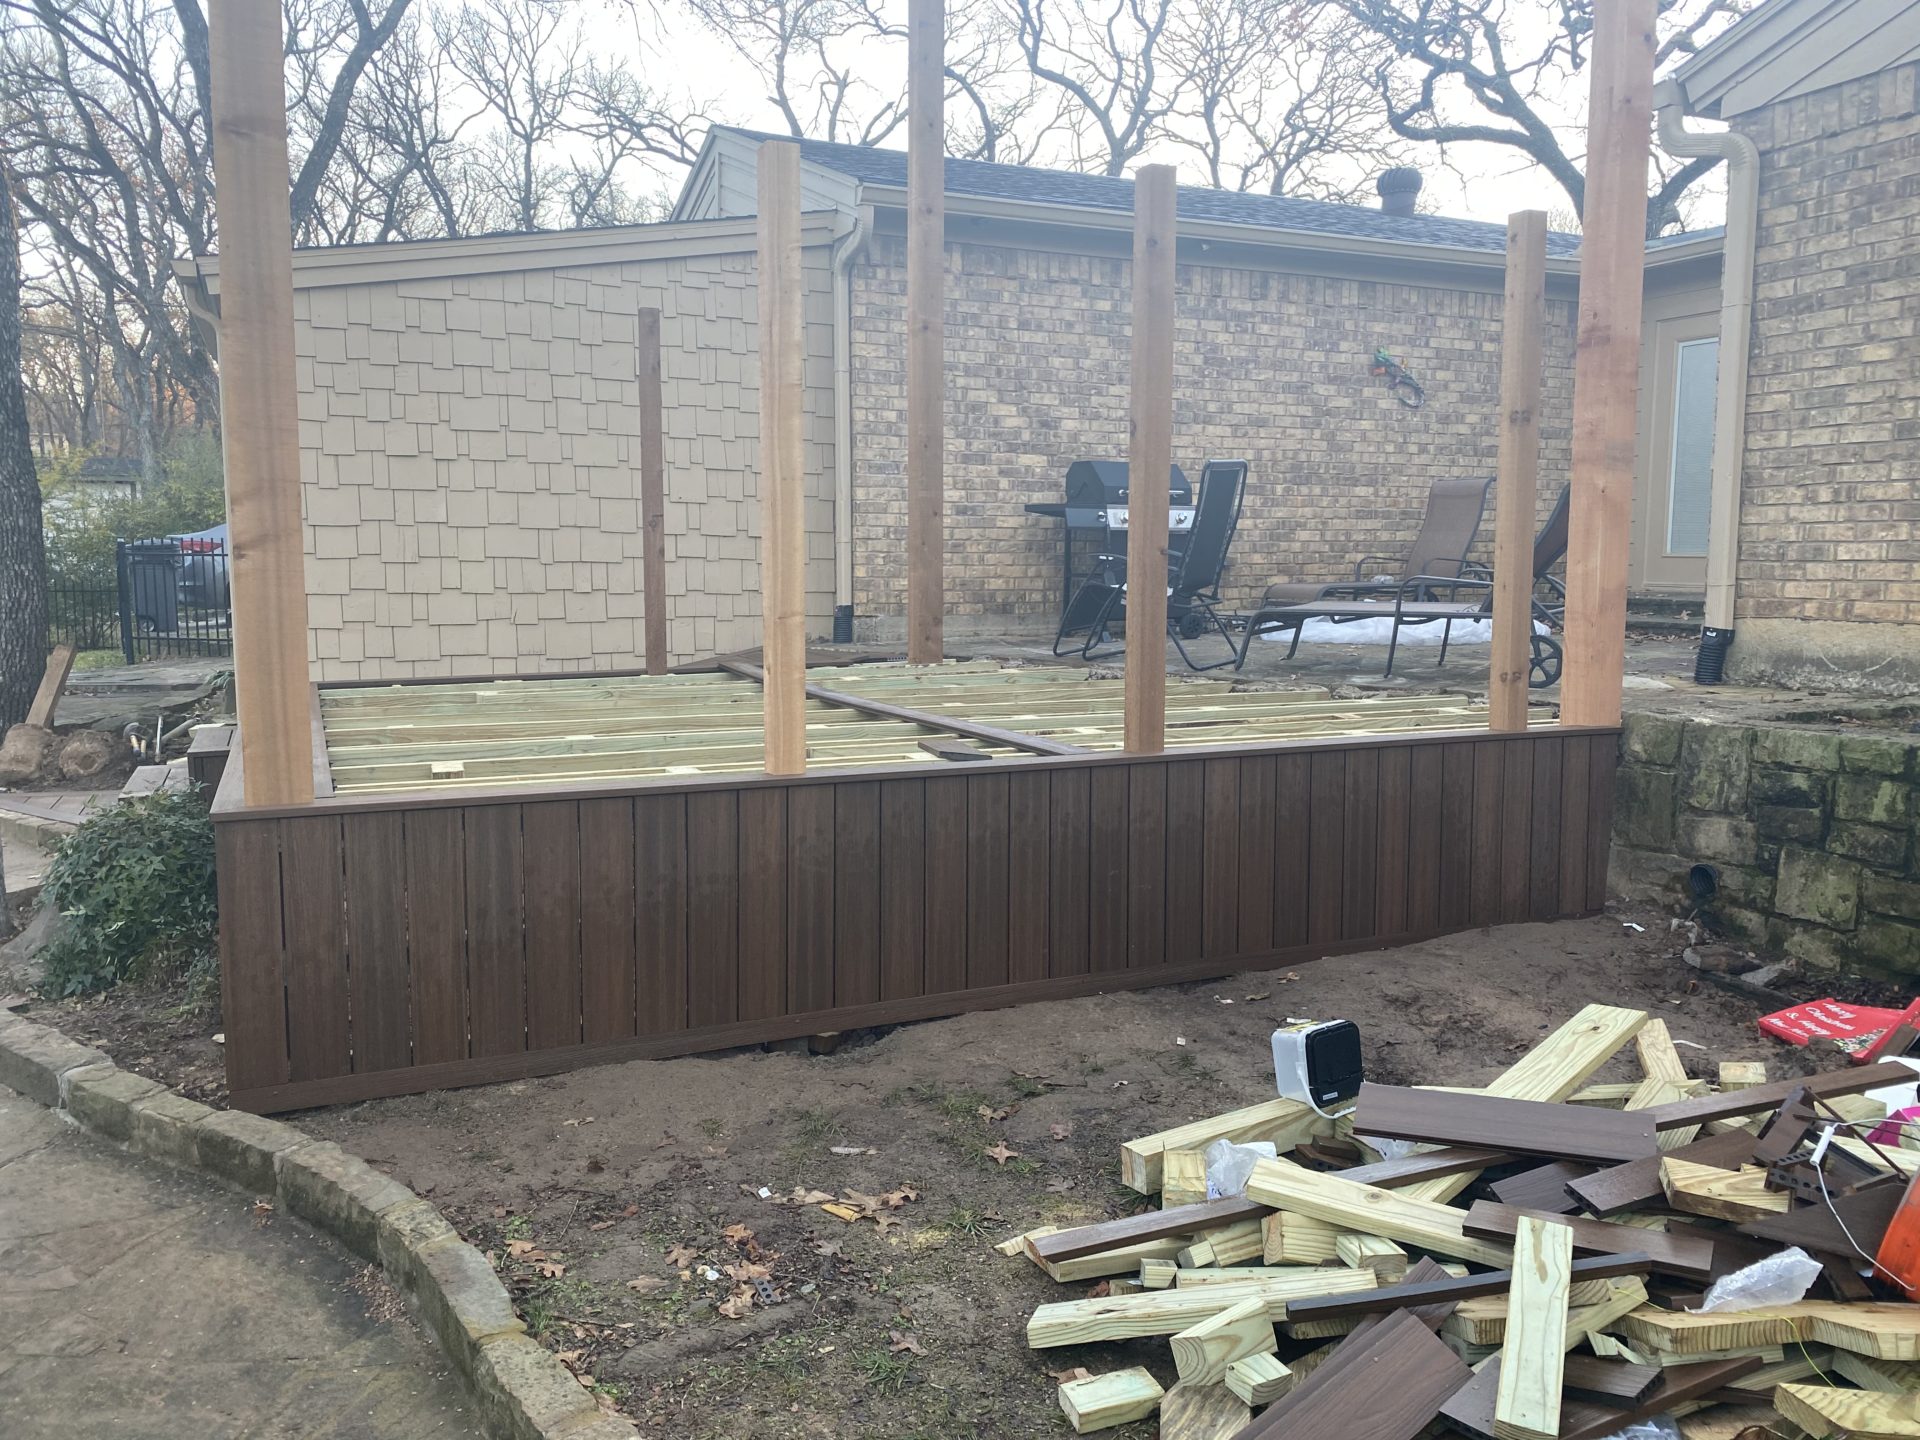 Backyard of a home in Hurst, TX with new patio deck under construction. Patio deck siding is completed.